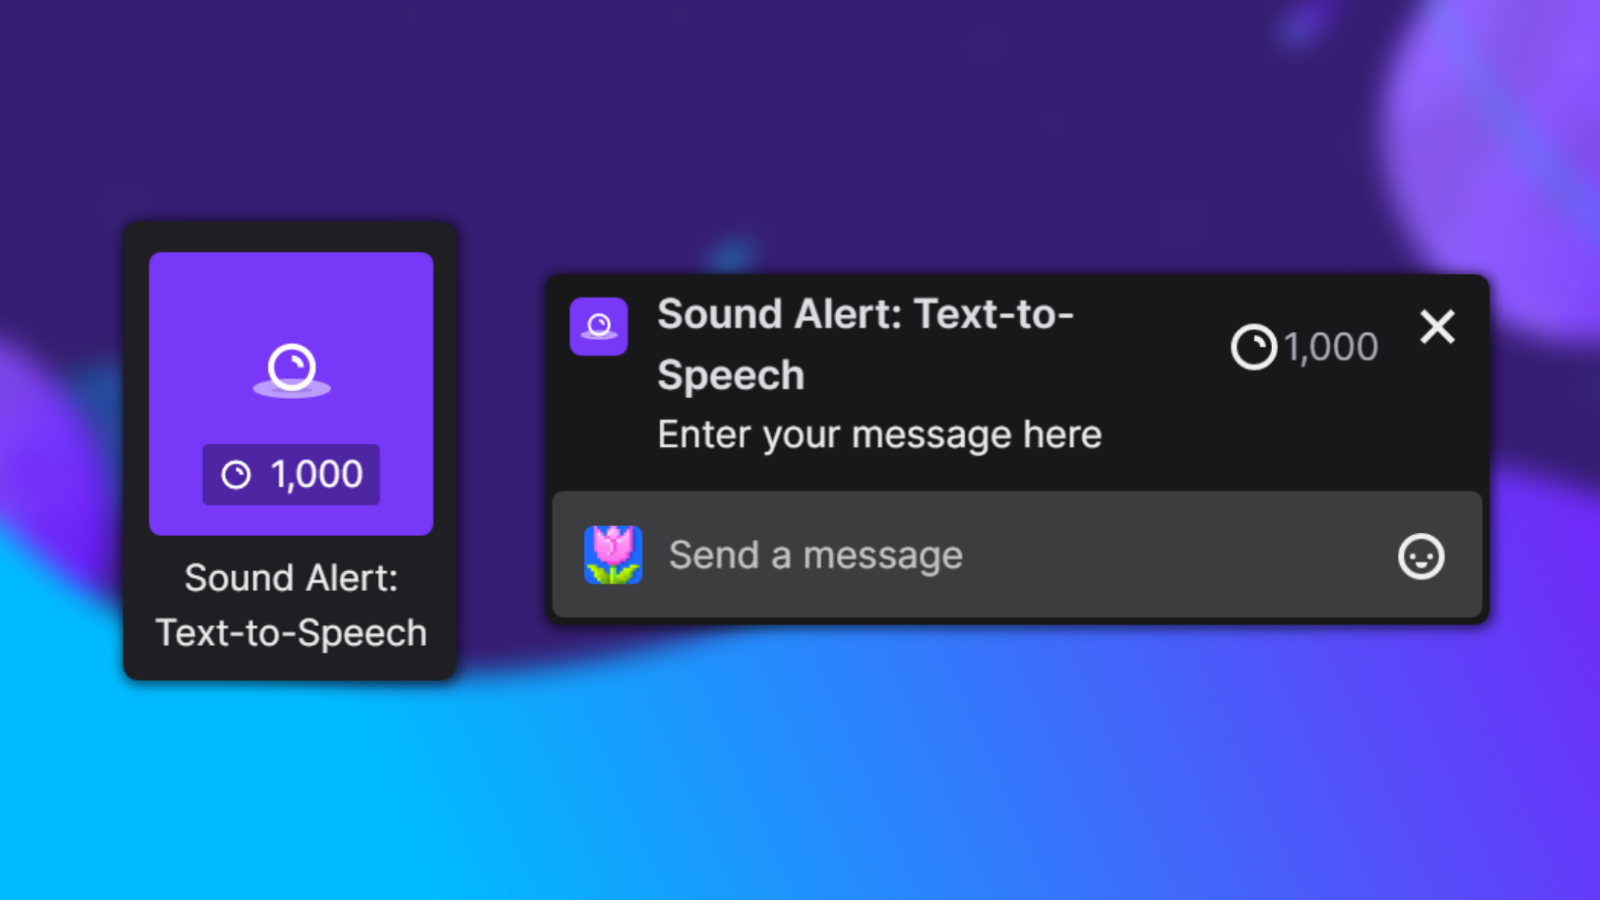 This image shows the Text-to-Speech Channel Points interface of Sound Alerts on Twitch.